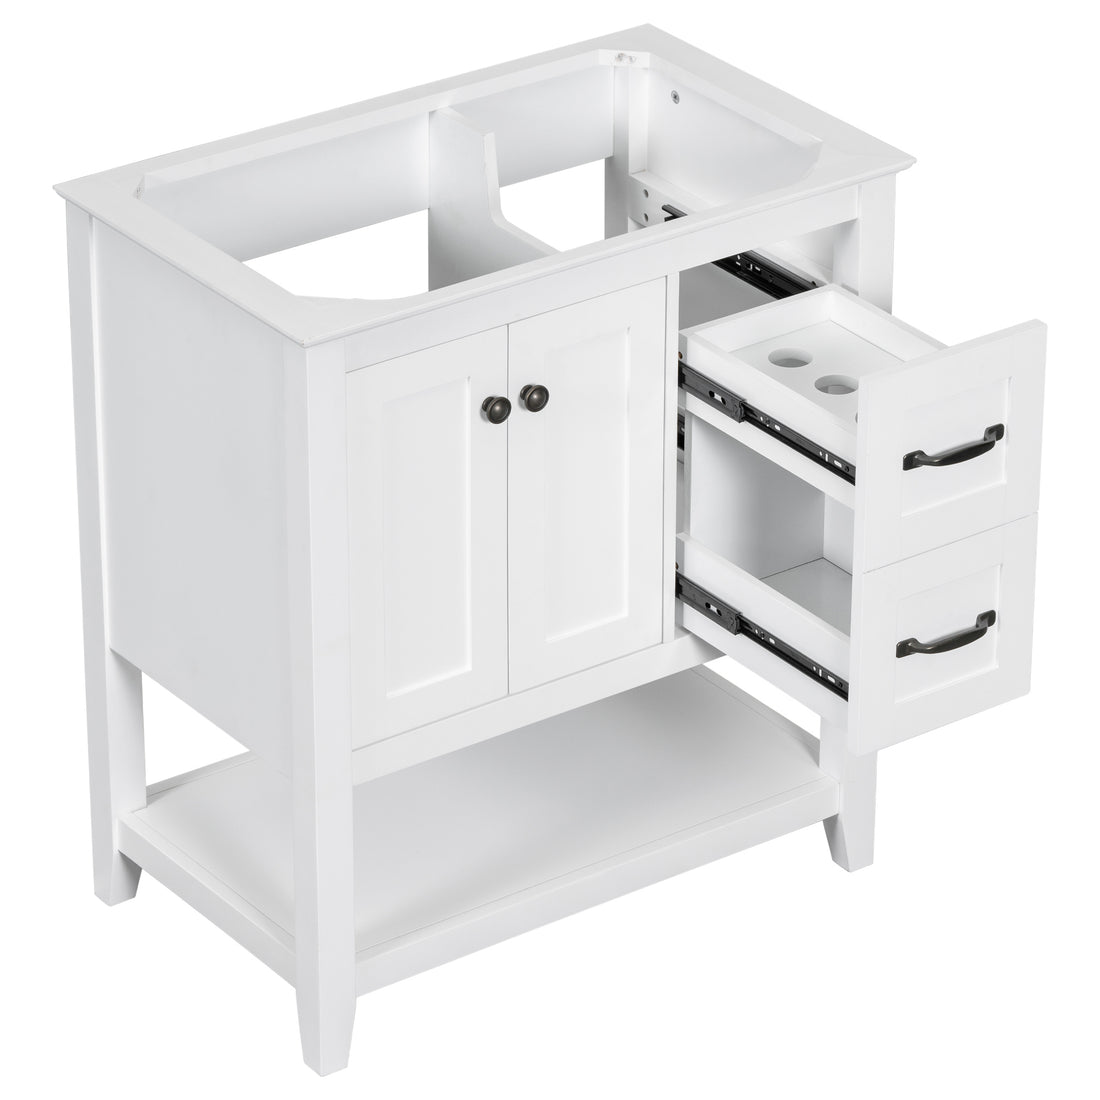 30" Bathroom Vanity without Sink Top, Cabinet Base white-solid wood+mdf